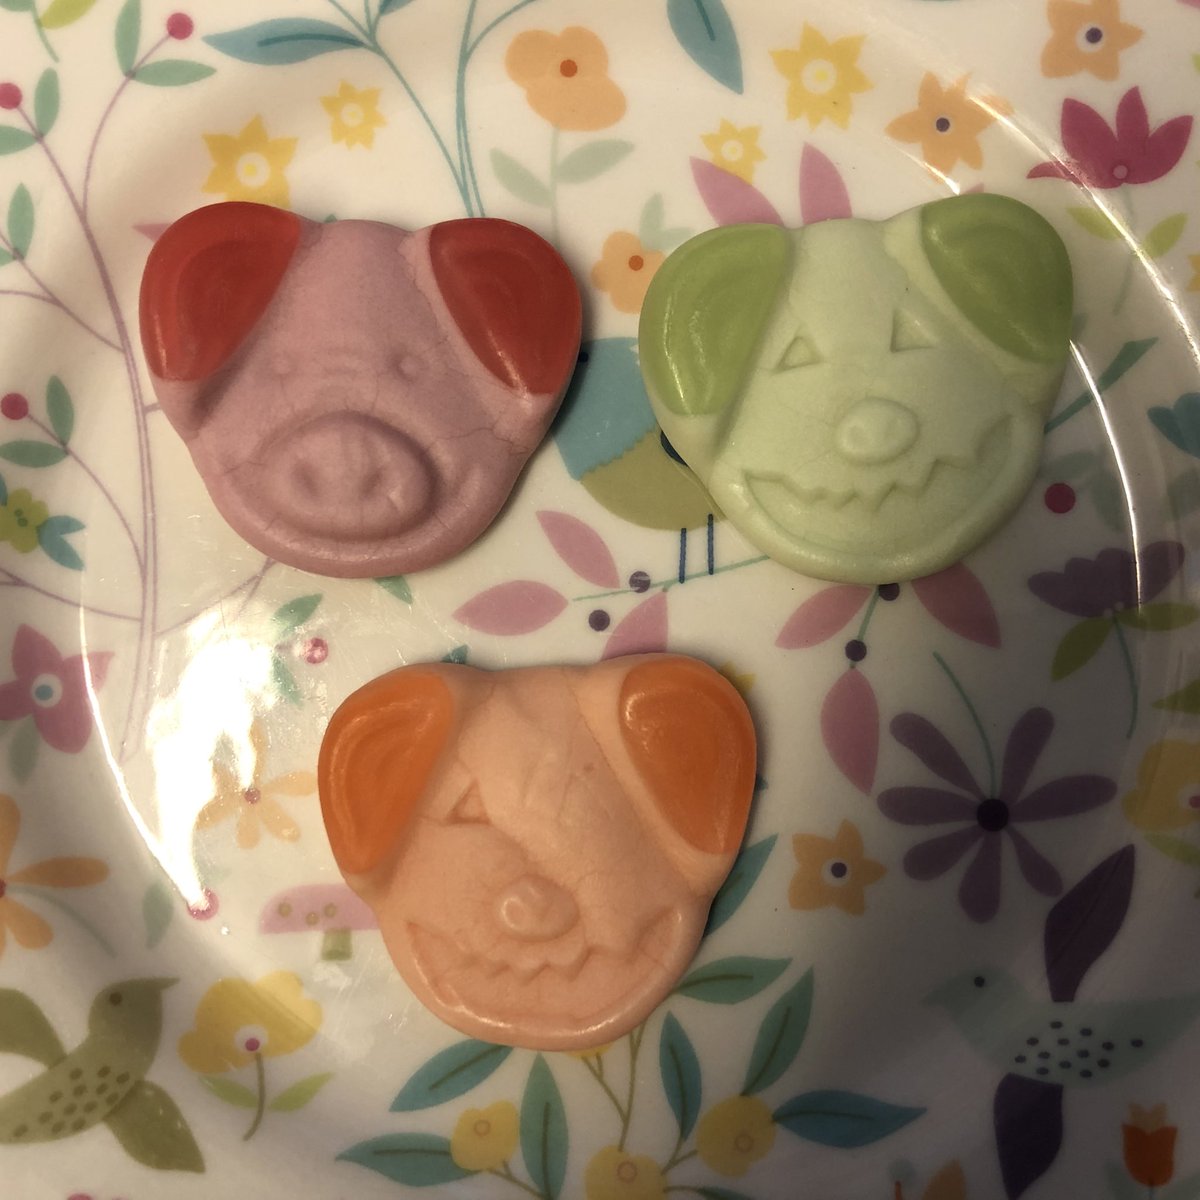 PERCY PIG GETS SPOOKYPercy is wearing a mask in the illustration & from the inclusion of regular percys we can only assume that the green/orange sweets are his masks. But if Percy can dress up, and play, does that not suggest he is sentient? Truly messed up /5